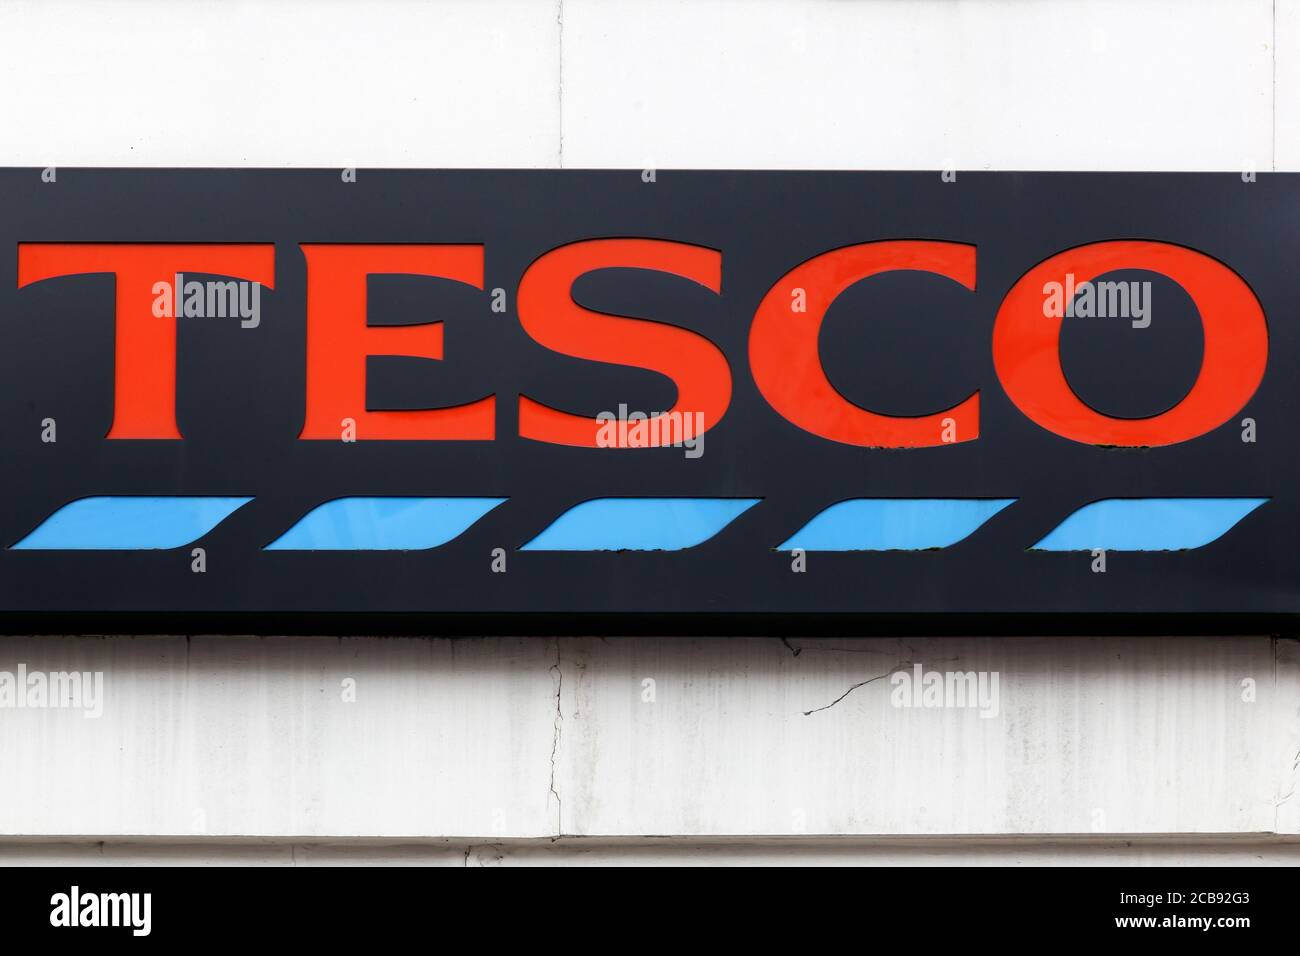 London, United Kingdom - September 25, 2019: Tesco logo on a wall. Tesco is a British multinational groceries and general merchandise retaile Stock Photo